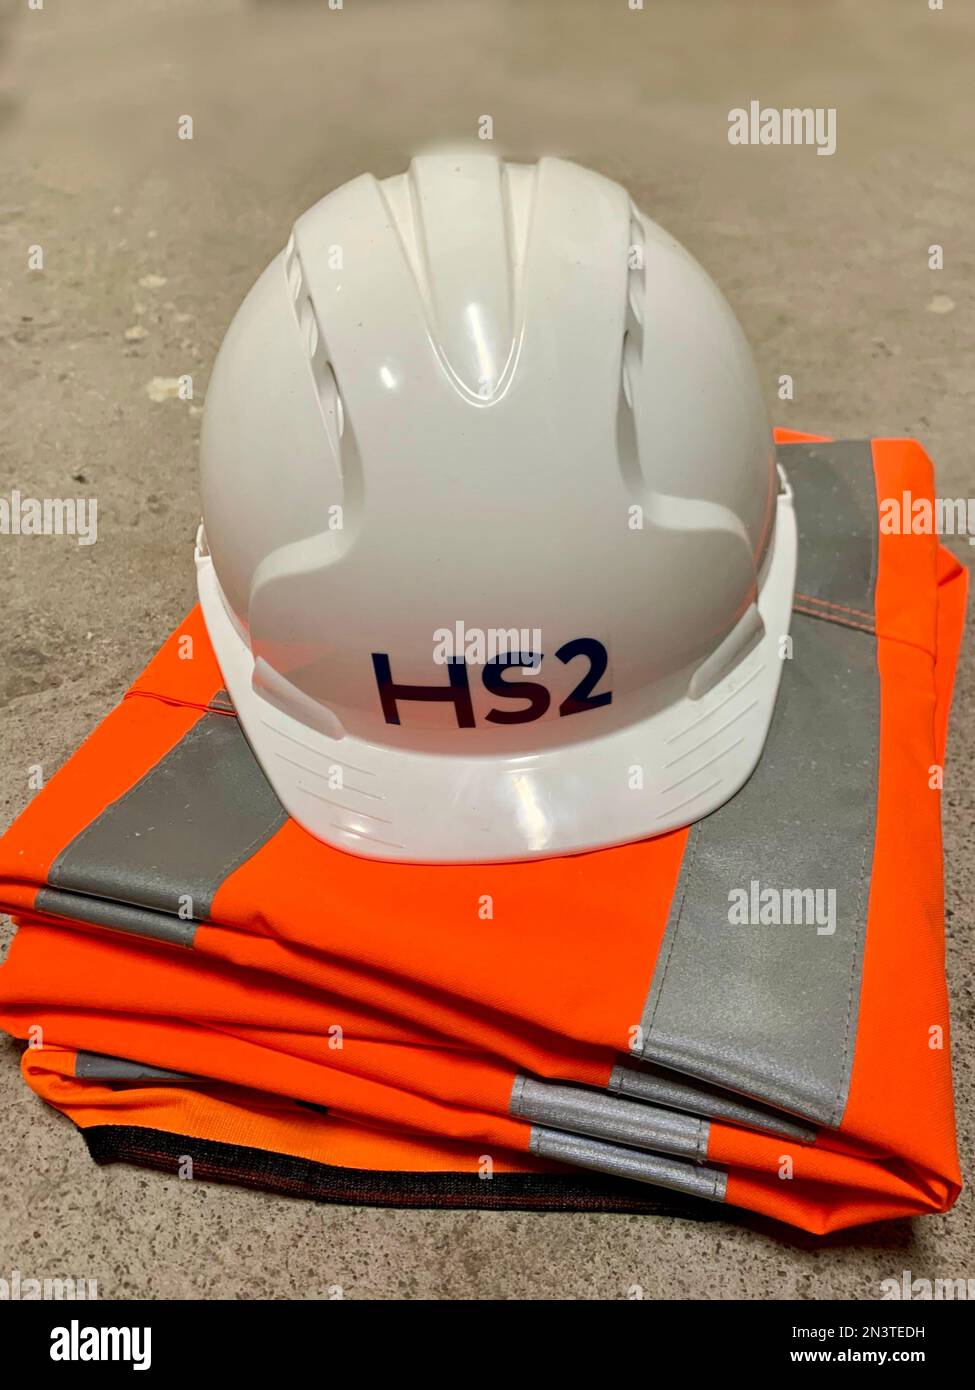 Construction hard hat and overalls for HS2 high speed train line, IK Stock Photo